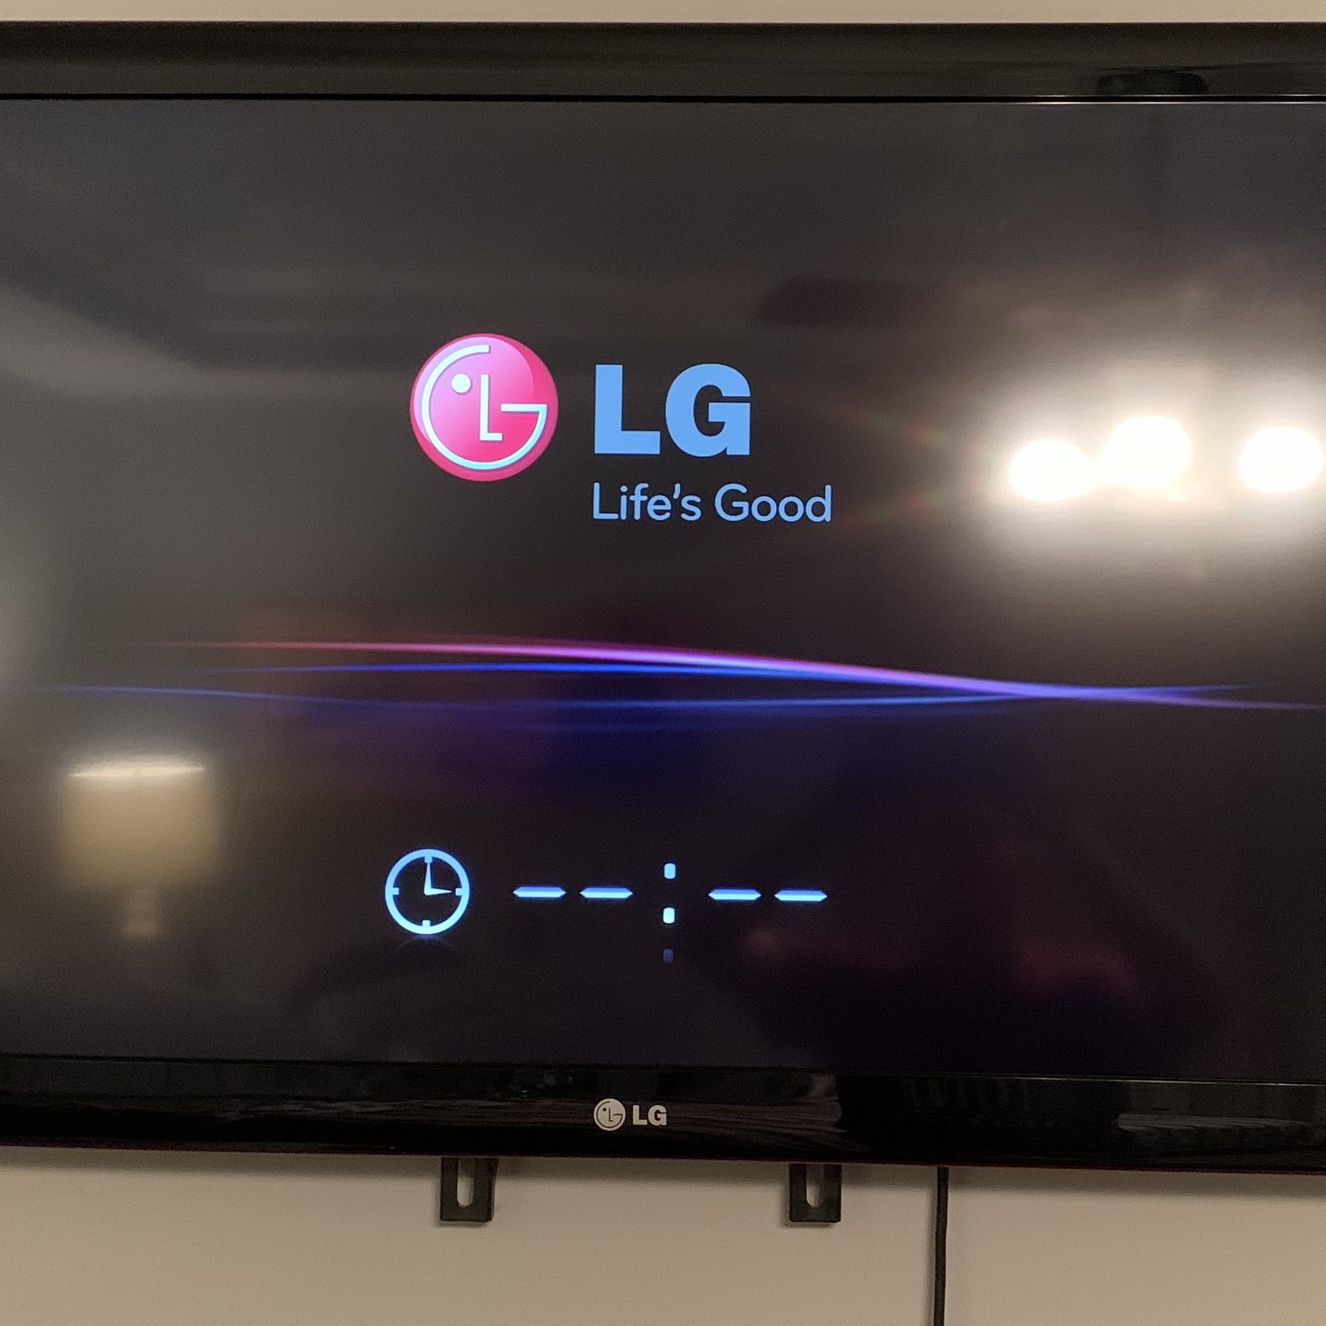 How To Update Software On LG TV